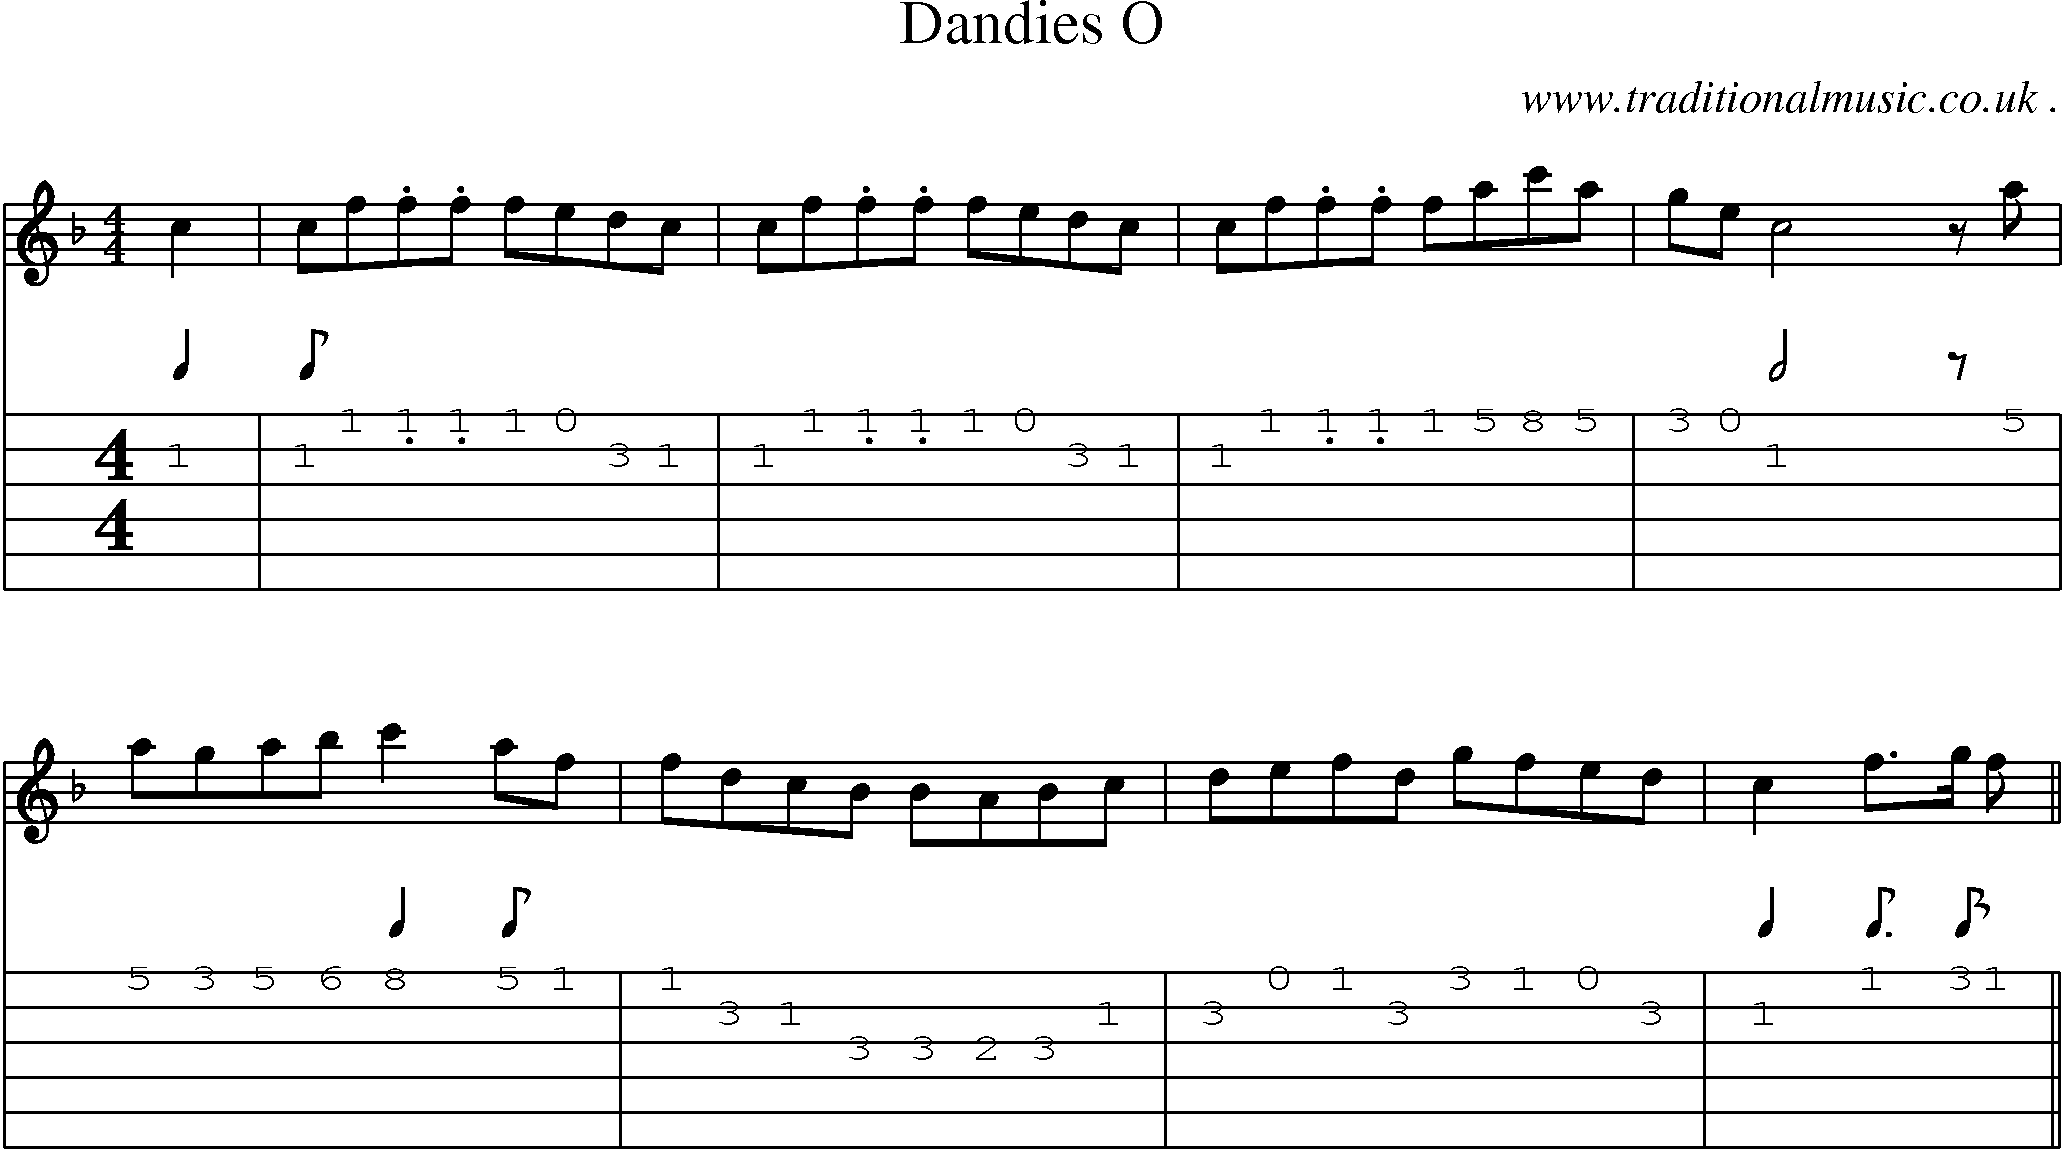 Sheet-Music and Guitar Tabs for Dandies O